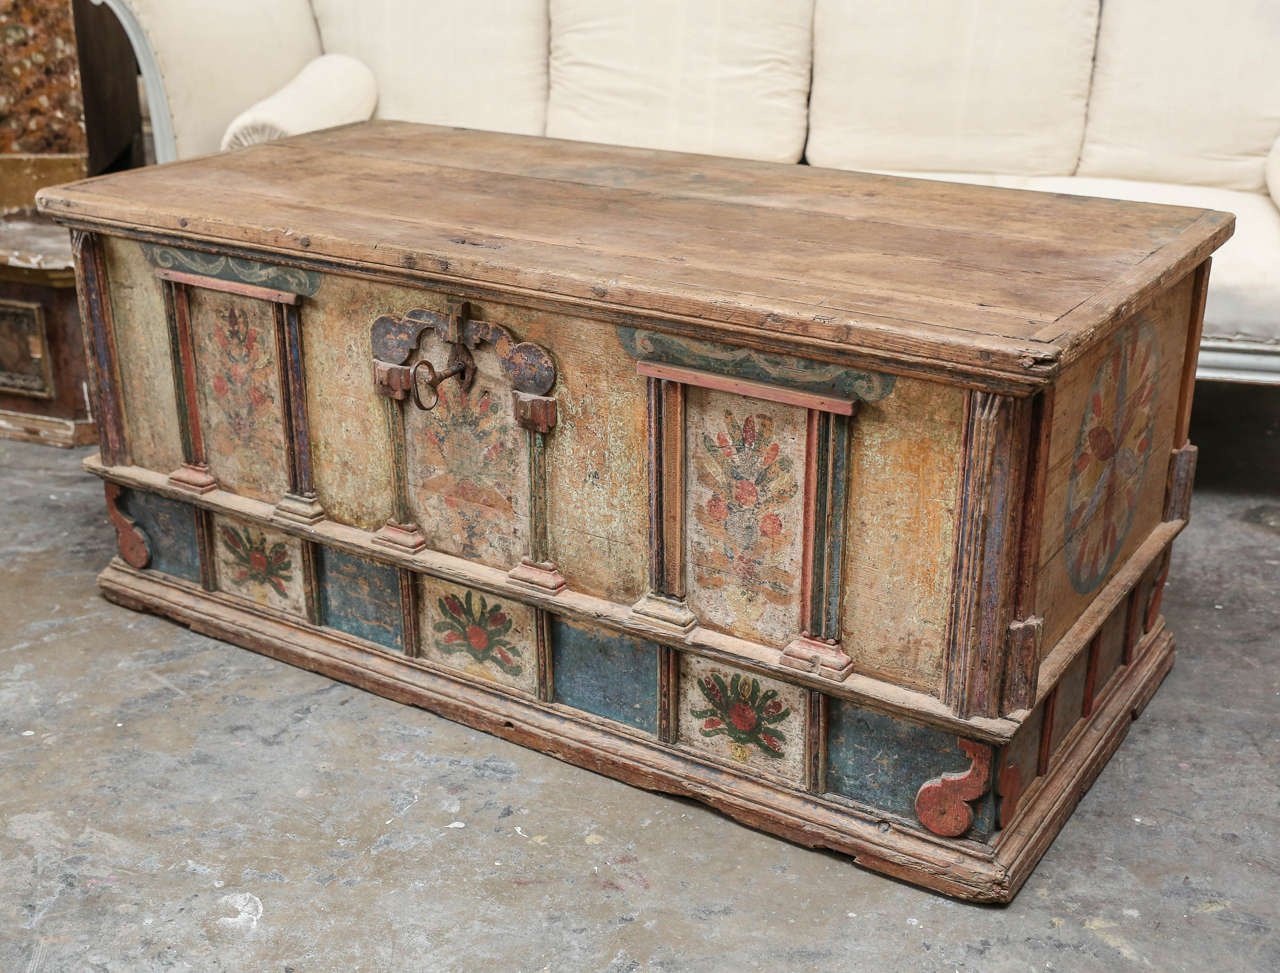 This whimsical 18th century Italian Folk Art trunk features beautifully painted designs in various colors that have faded over time. Its grandiose size would make a great edition to any home.